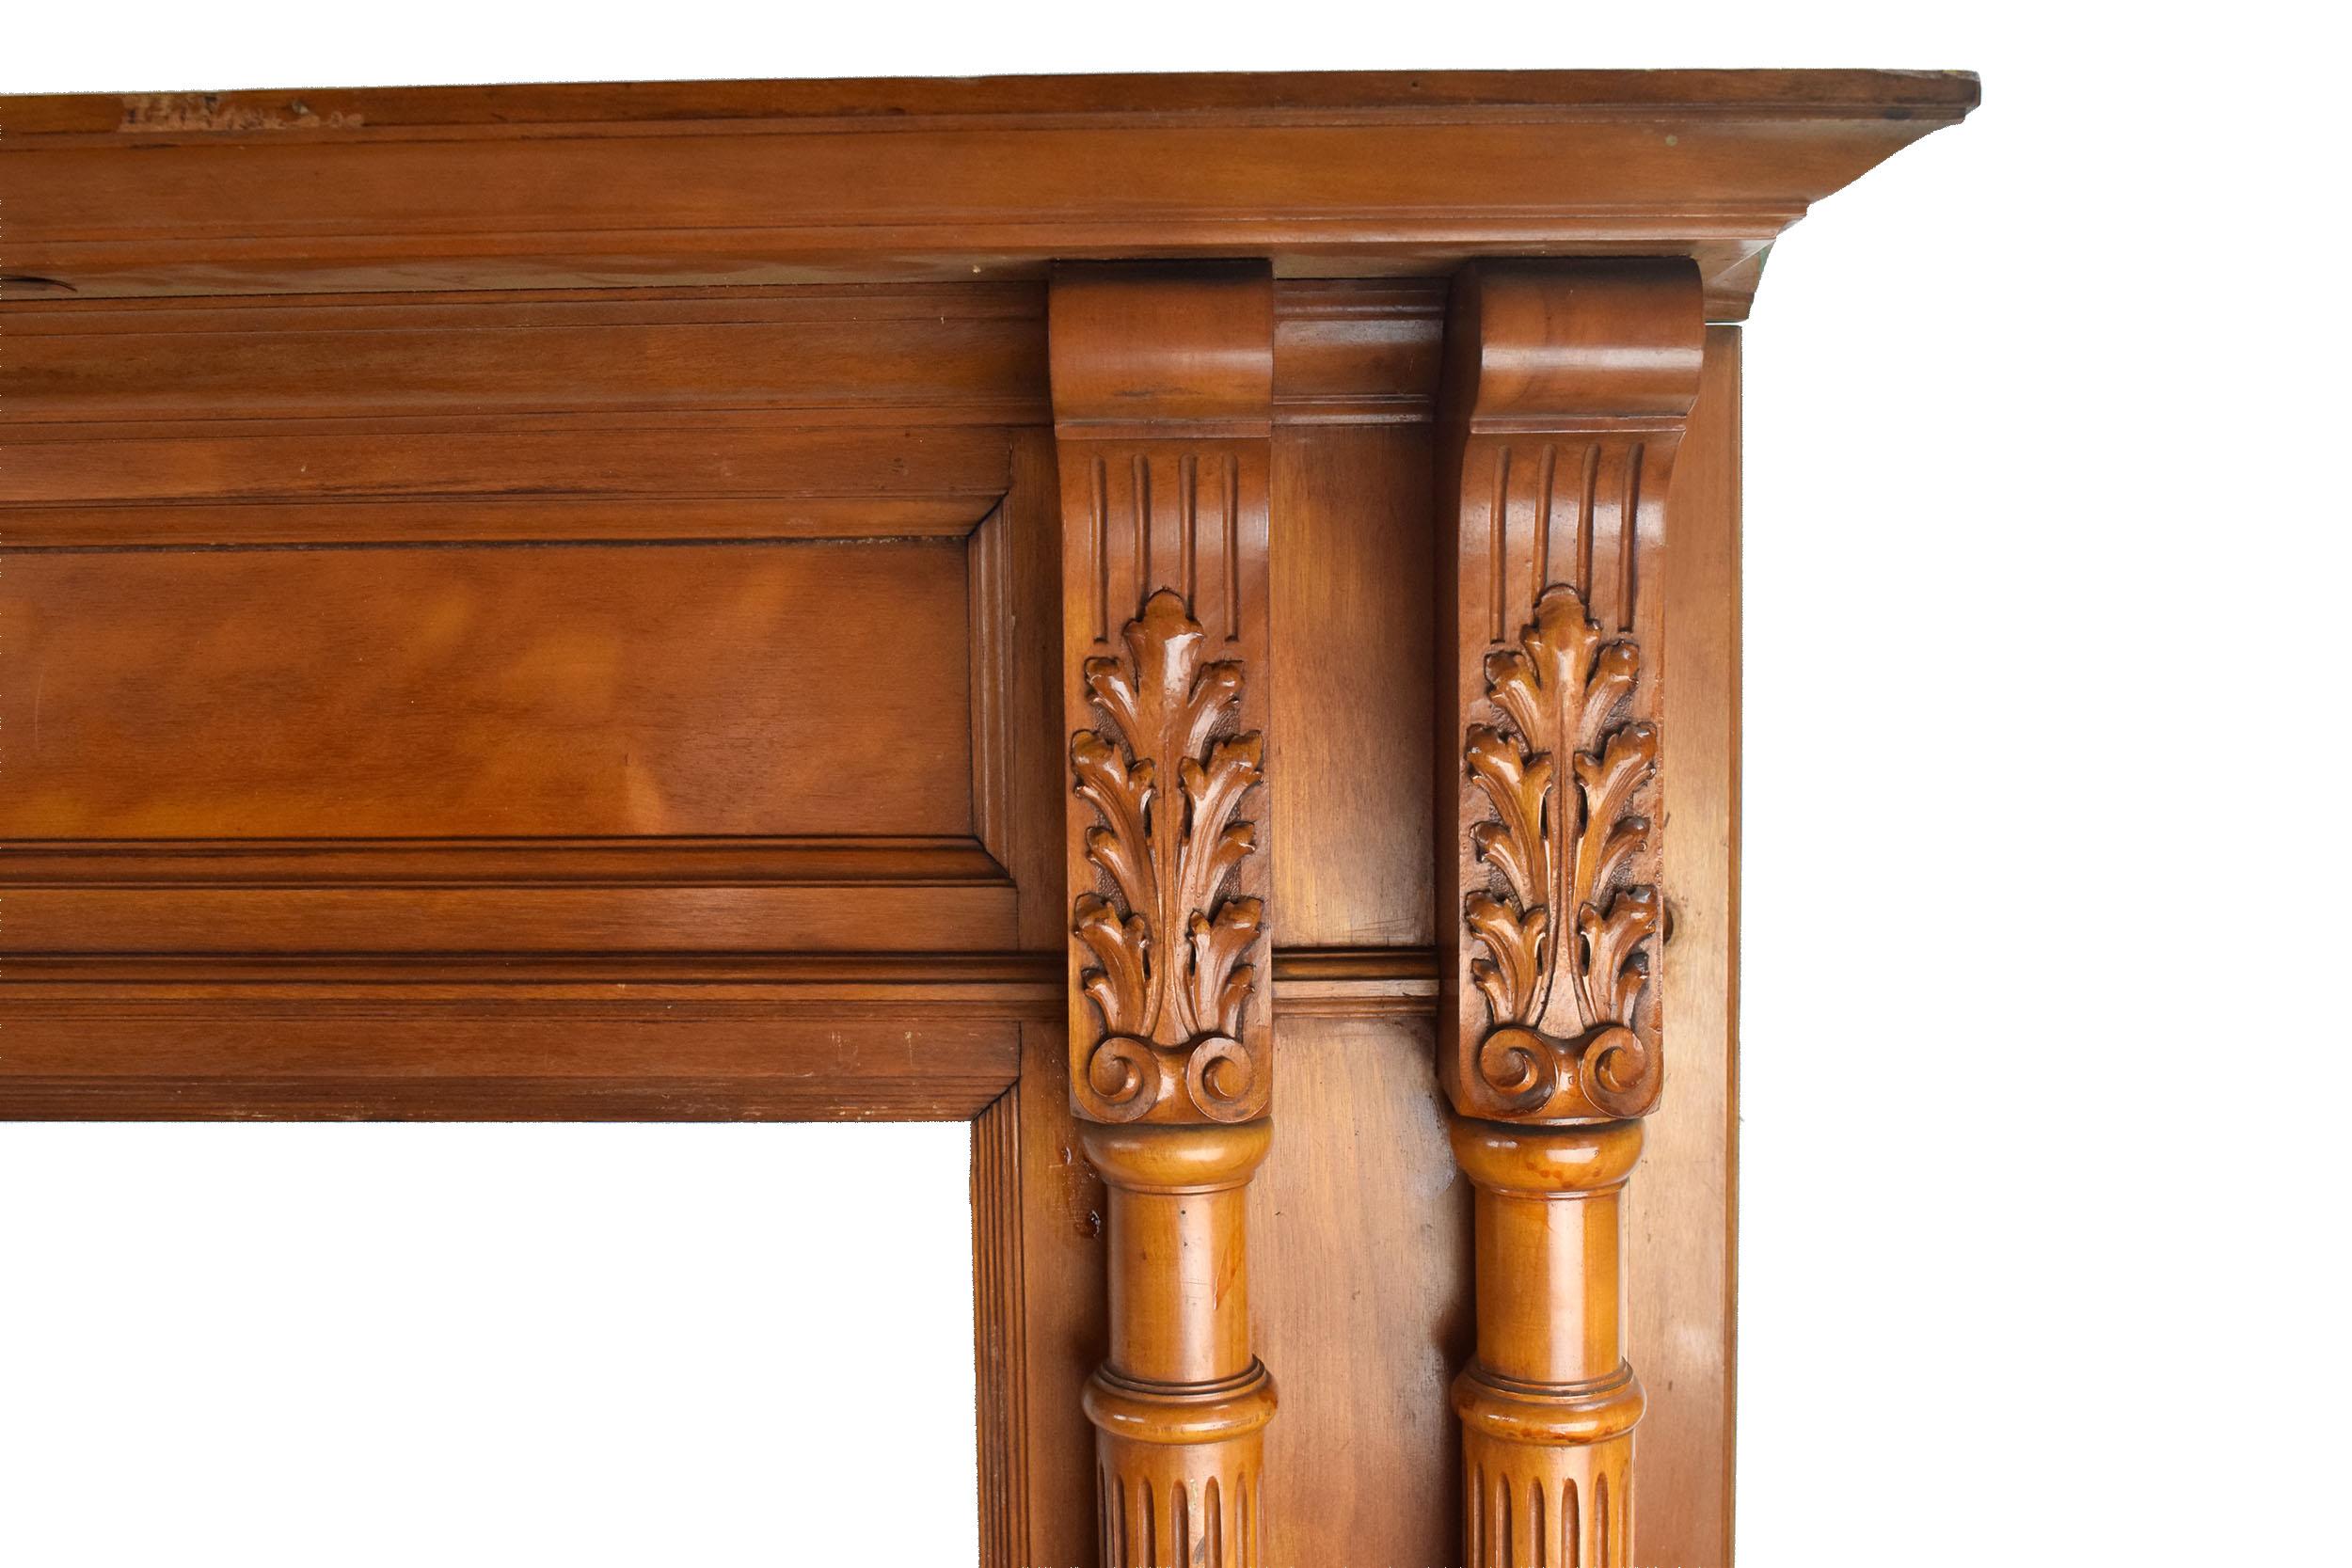 American Maple Mantel with Carved Spindles